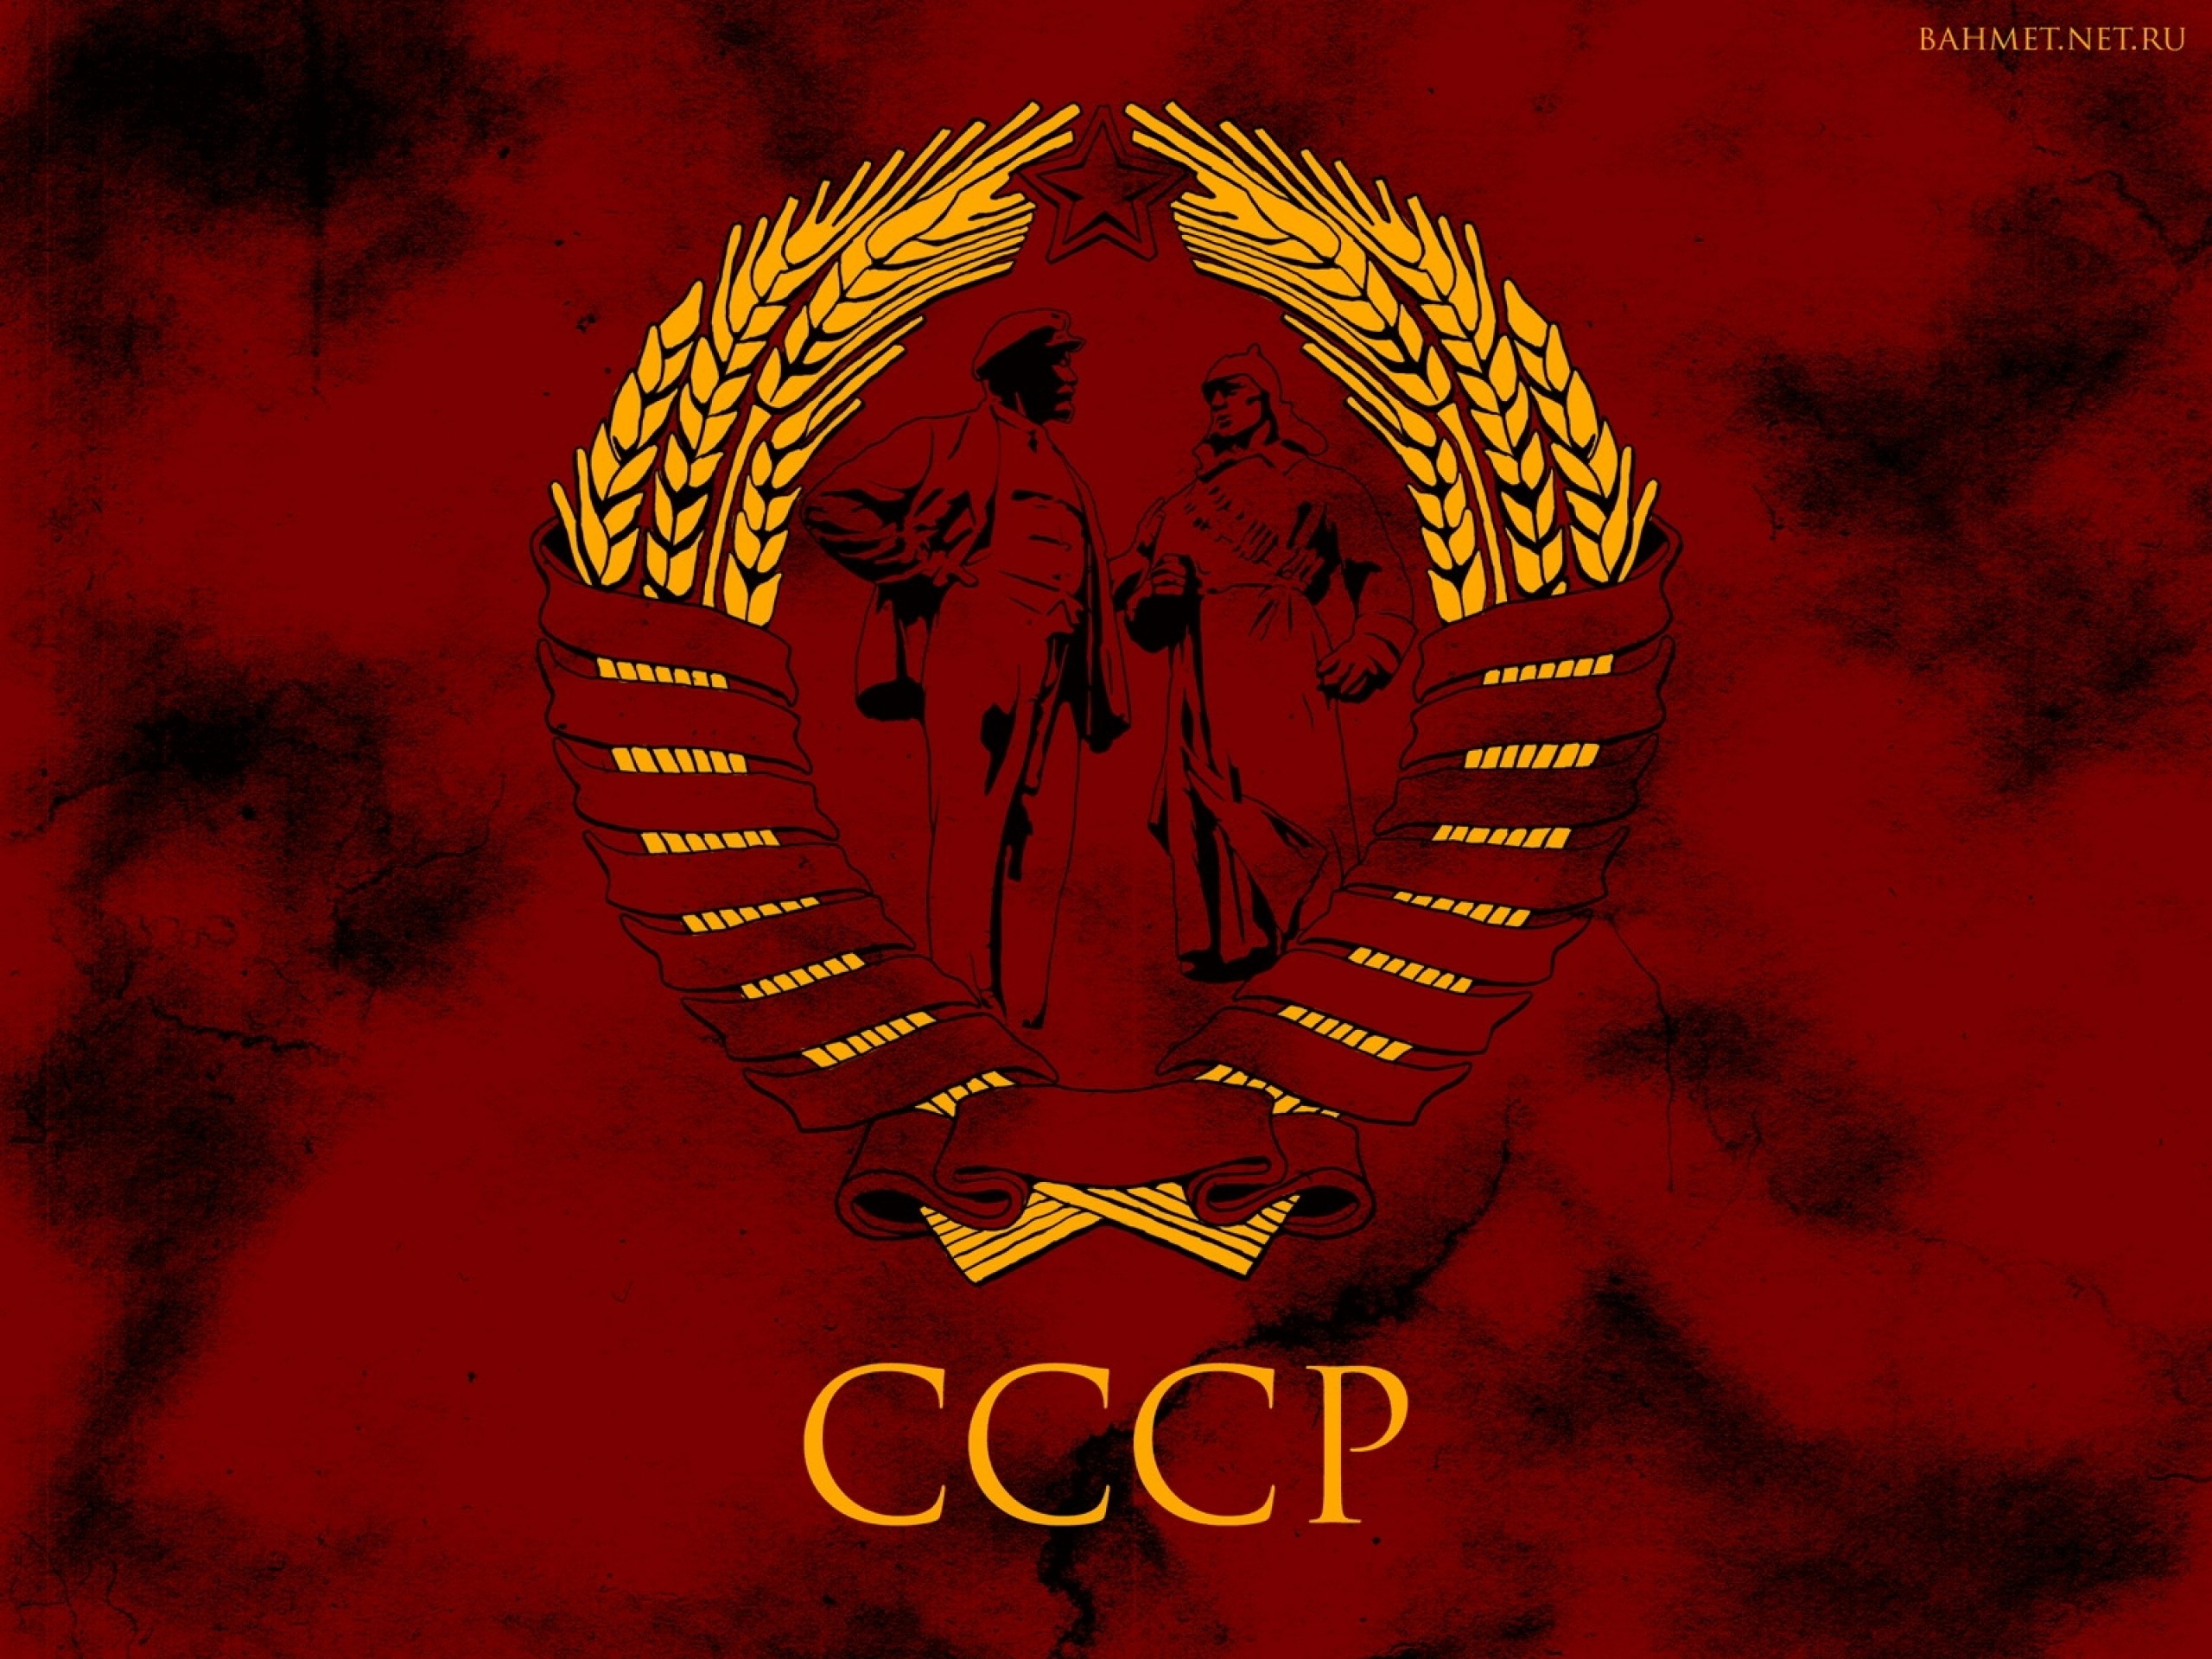 2560x1920 Download Wallpapers, Download  cccp 1600x1200 .